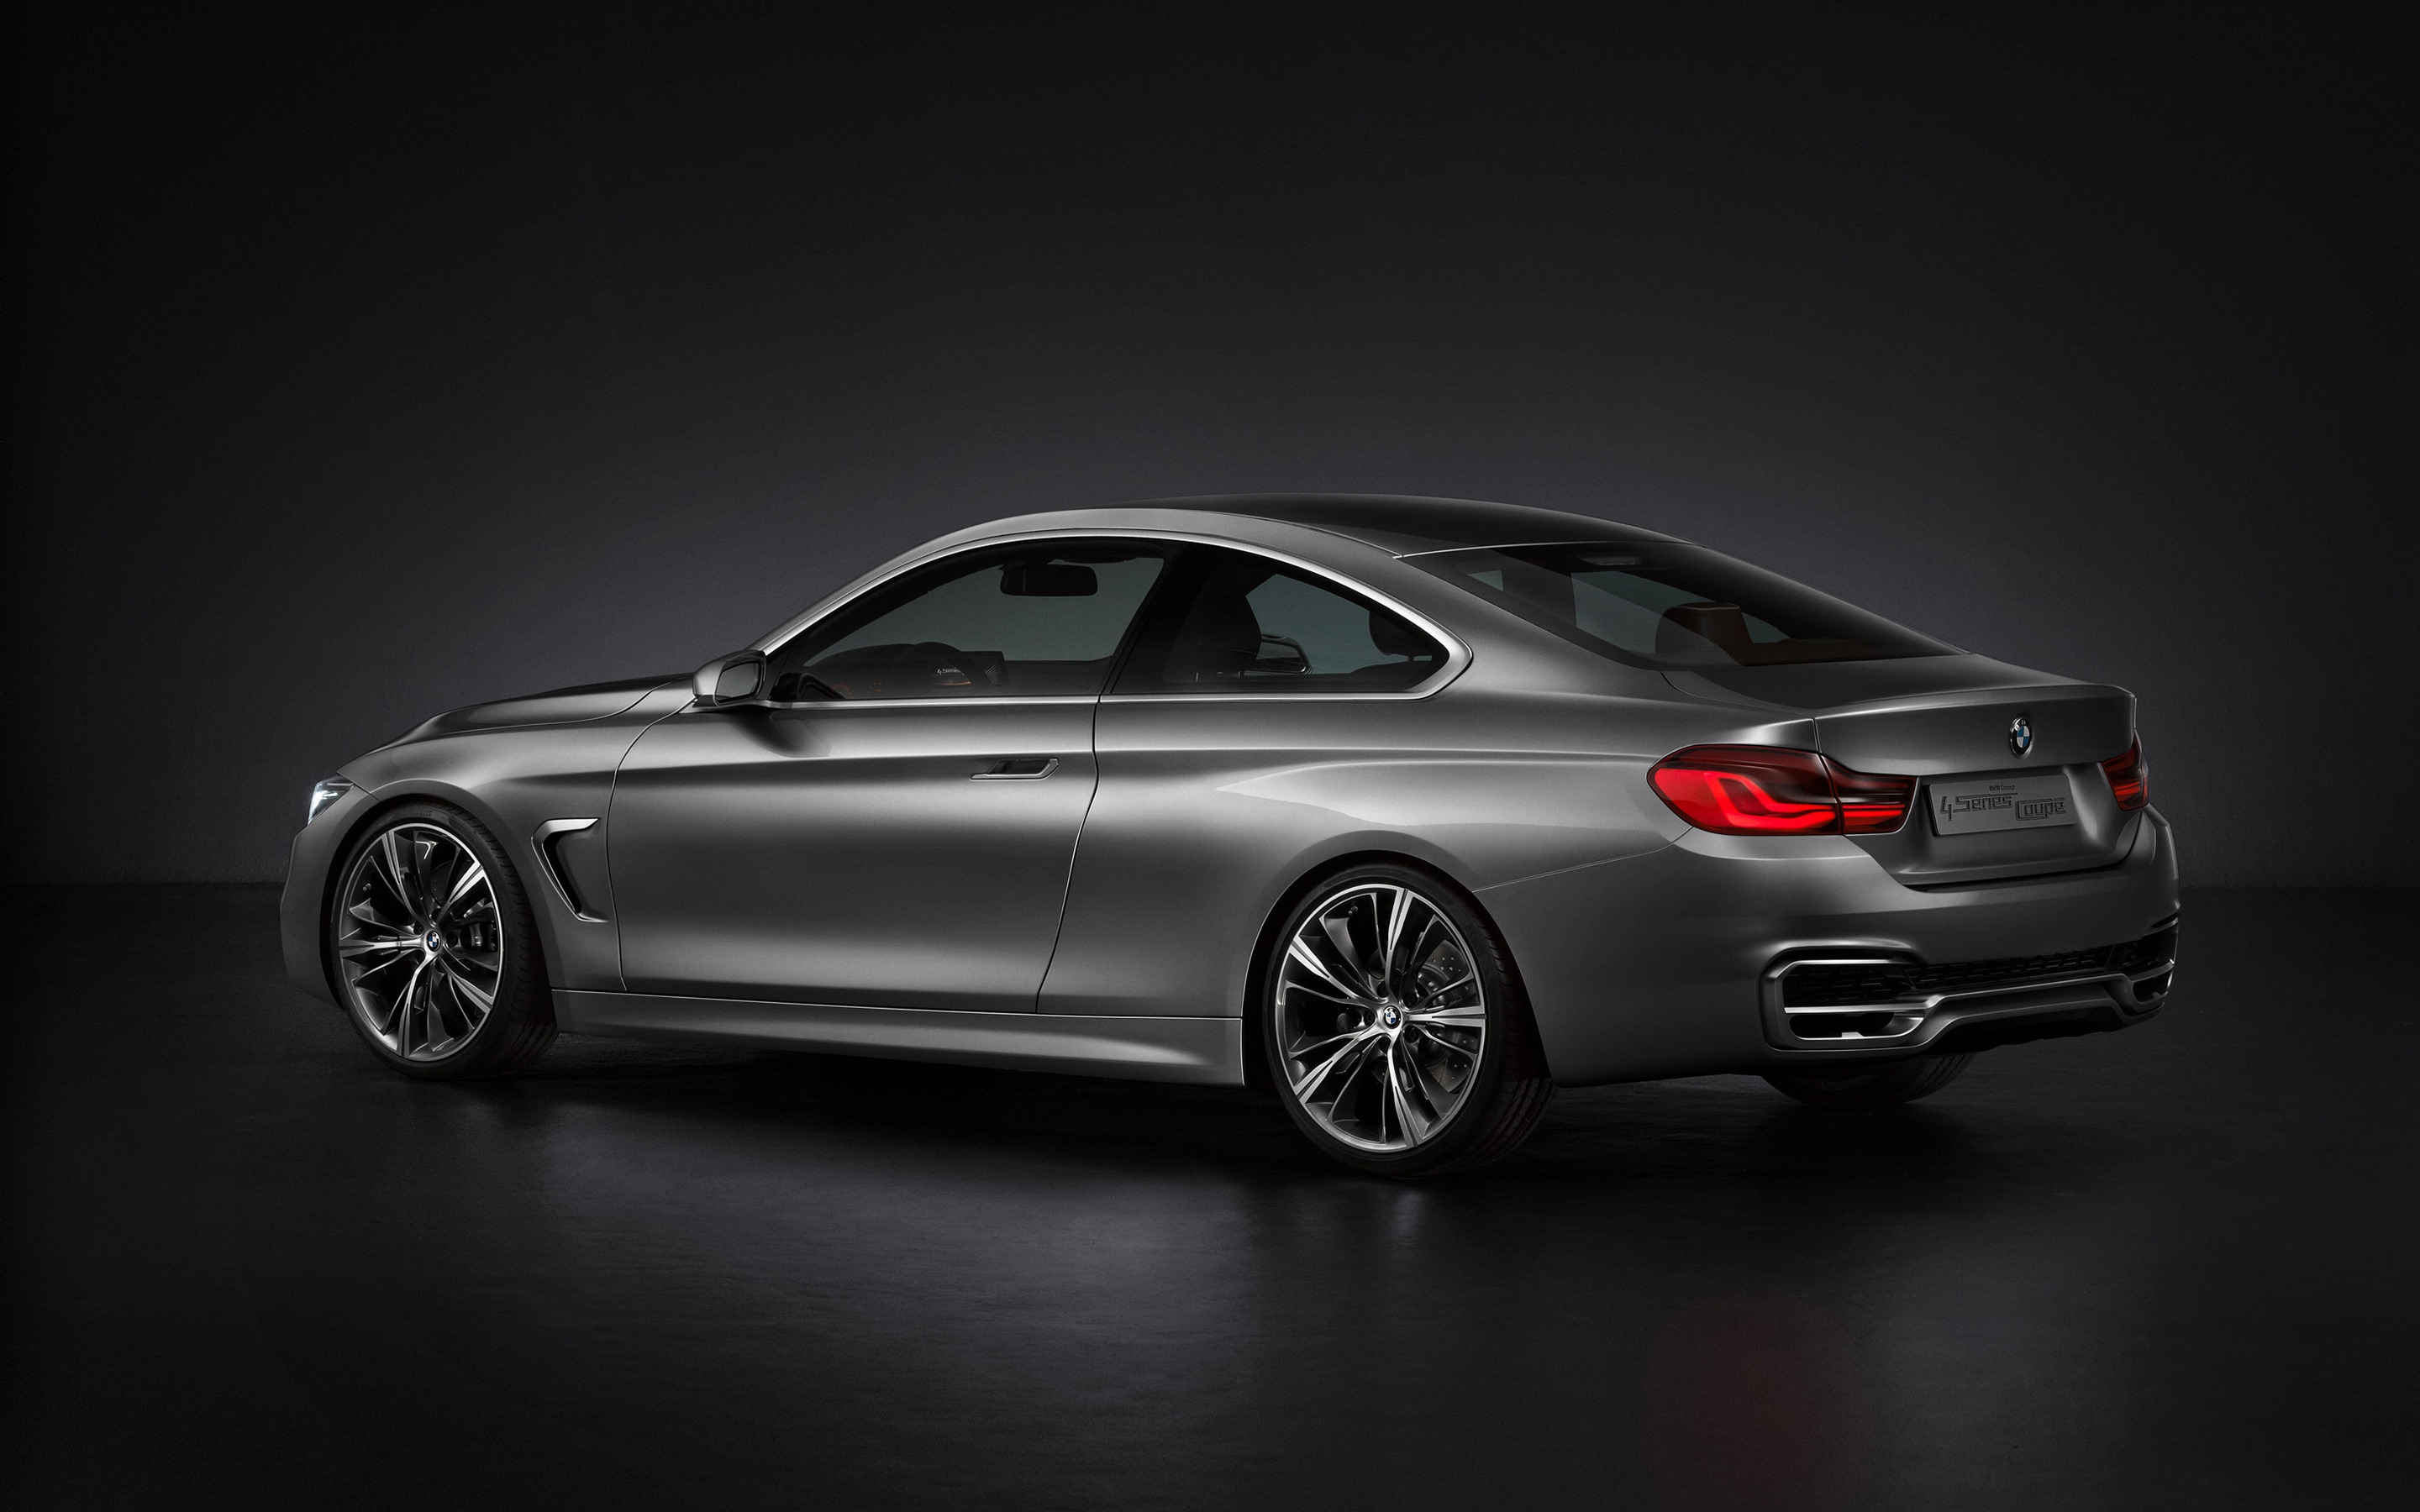 BMW 4 Series Coupe Concept Rear Studio for 2880 x 1800 Retina Display resolution